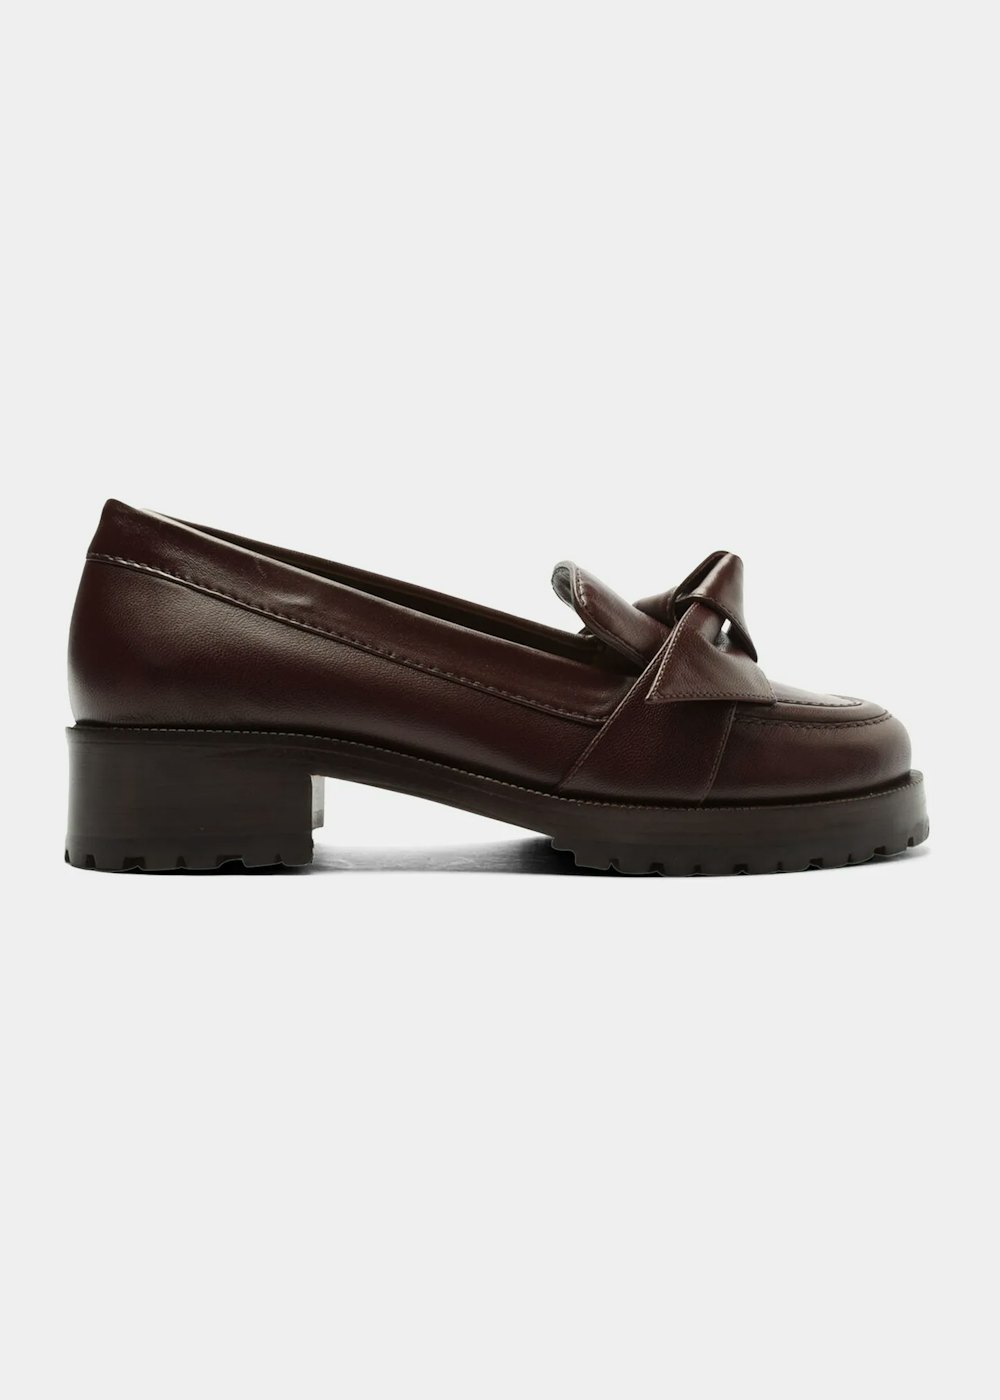 Shop 21 Chunky Platform Loafers For Fall